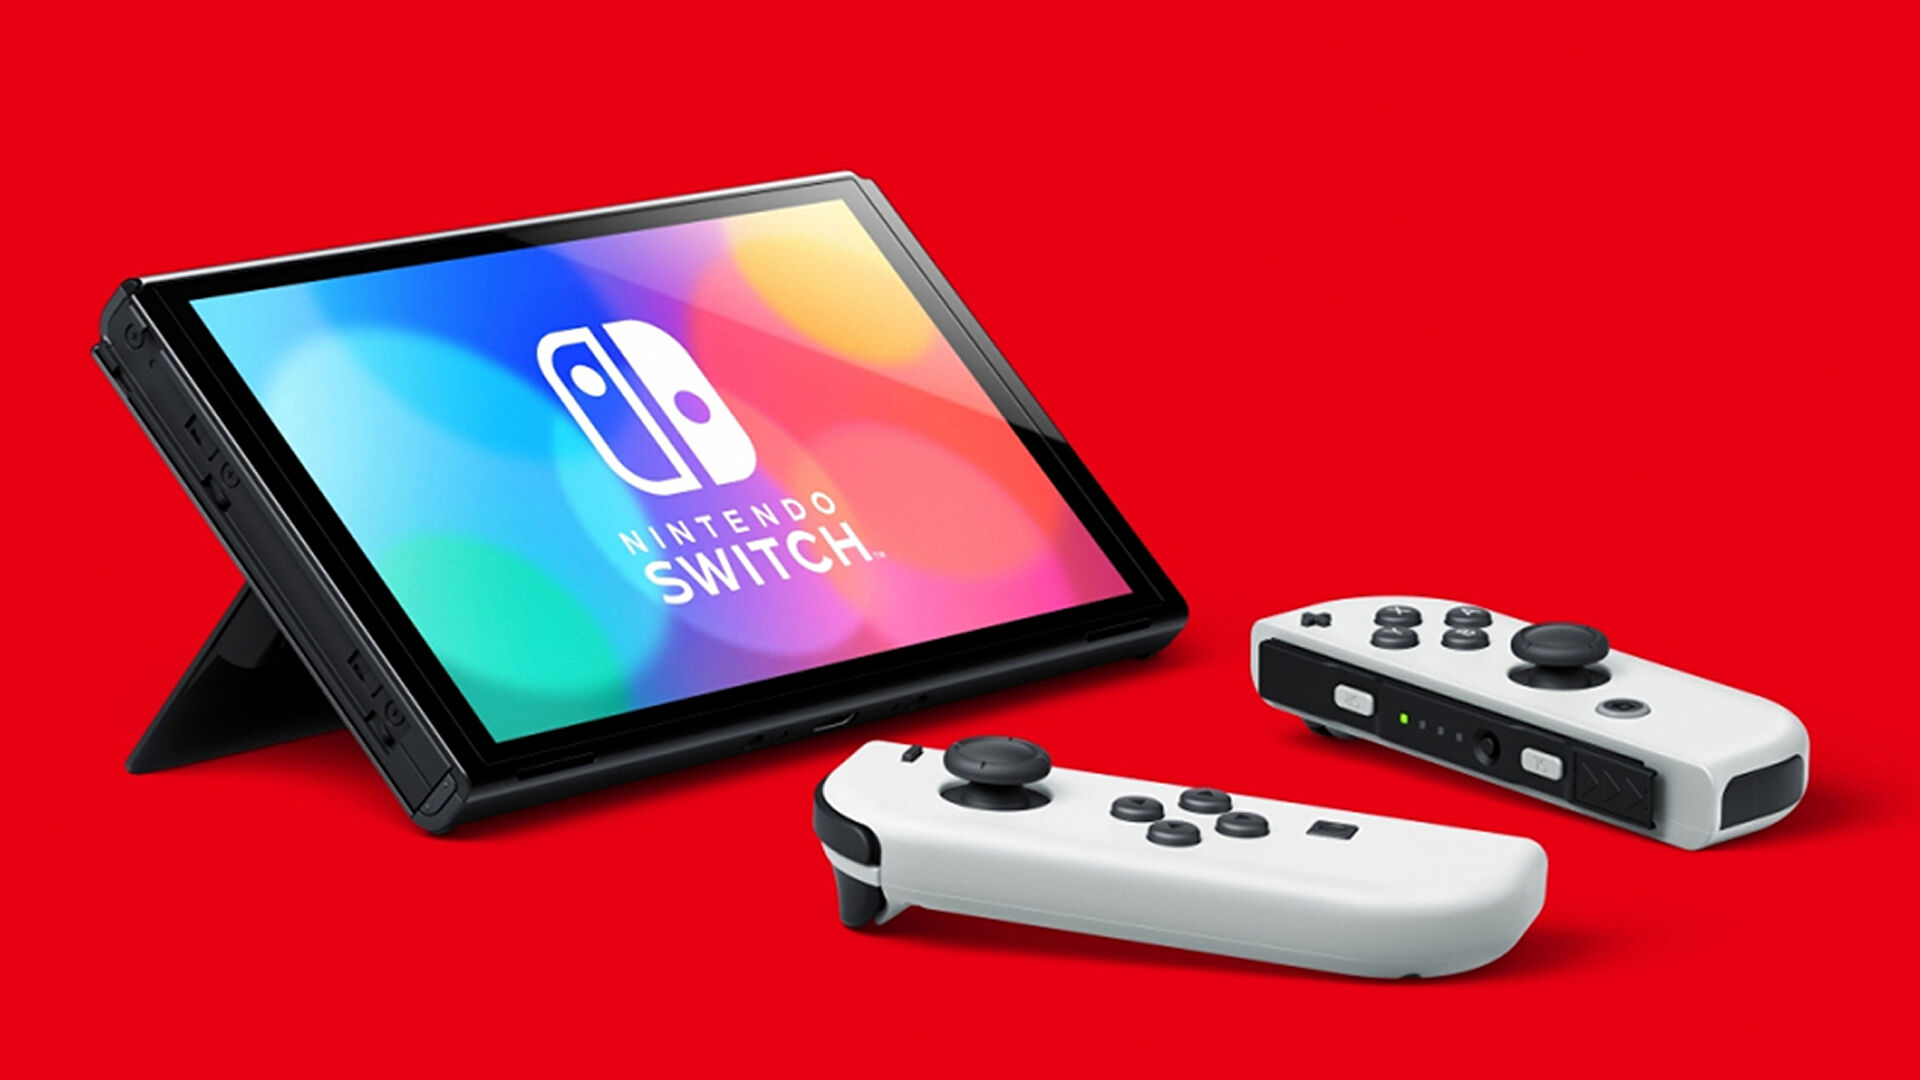 Nintendo has no plans for a Nintendo Switch price hike “at this point”